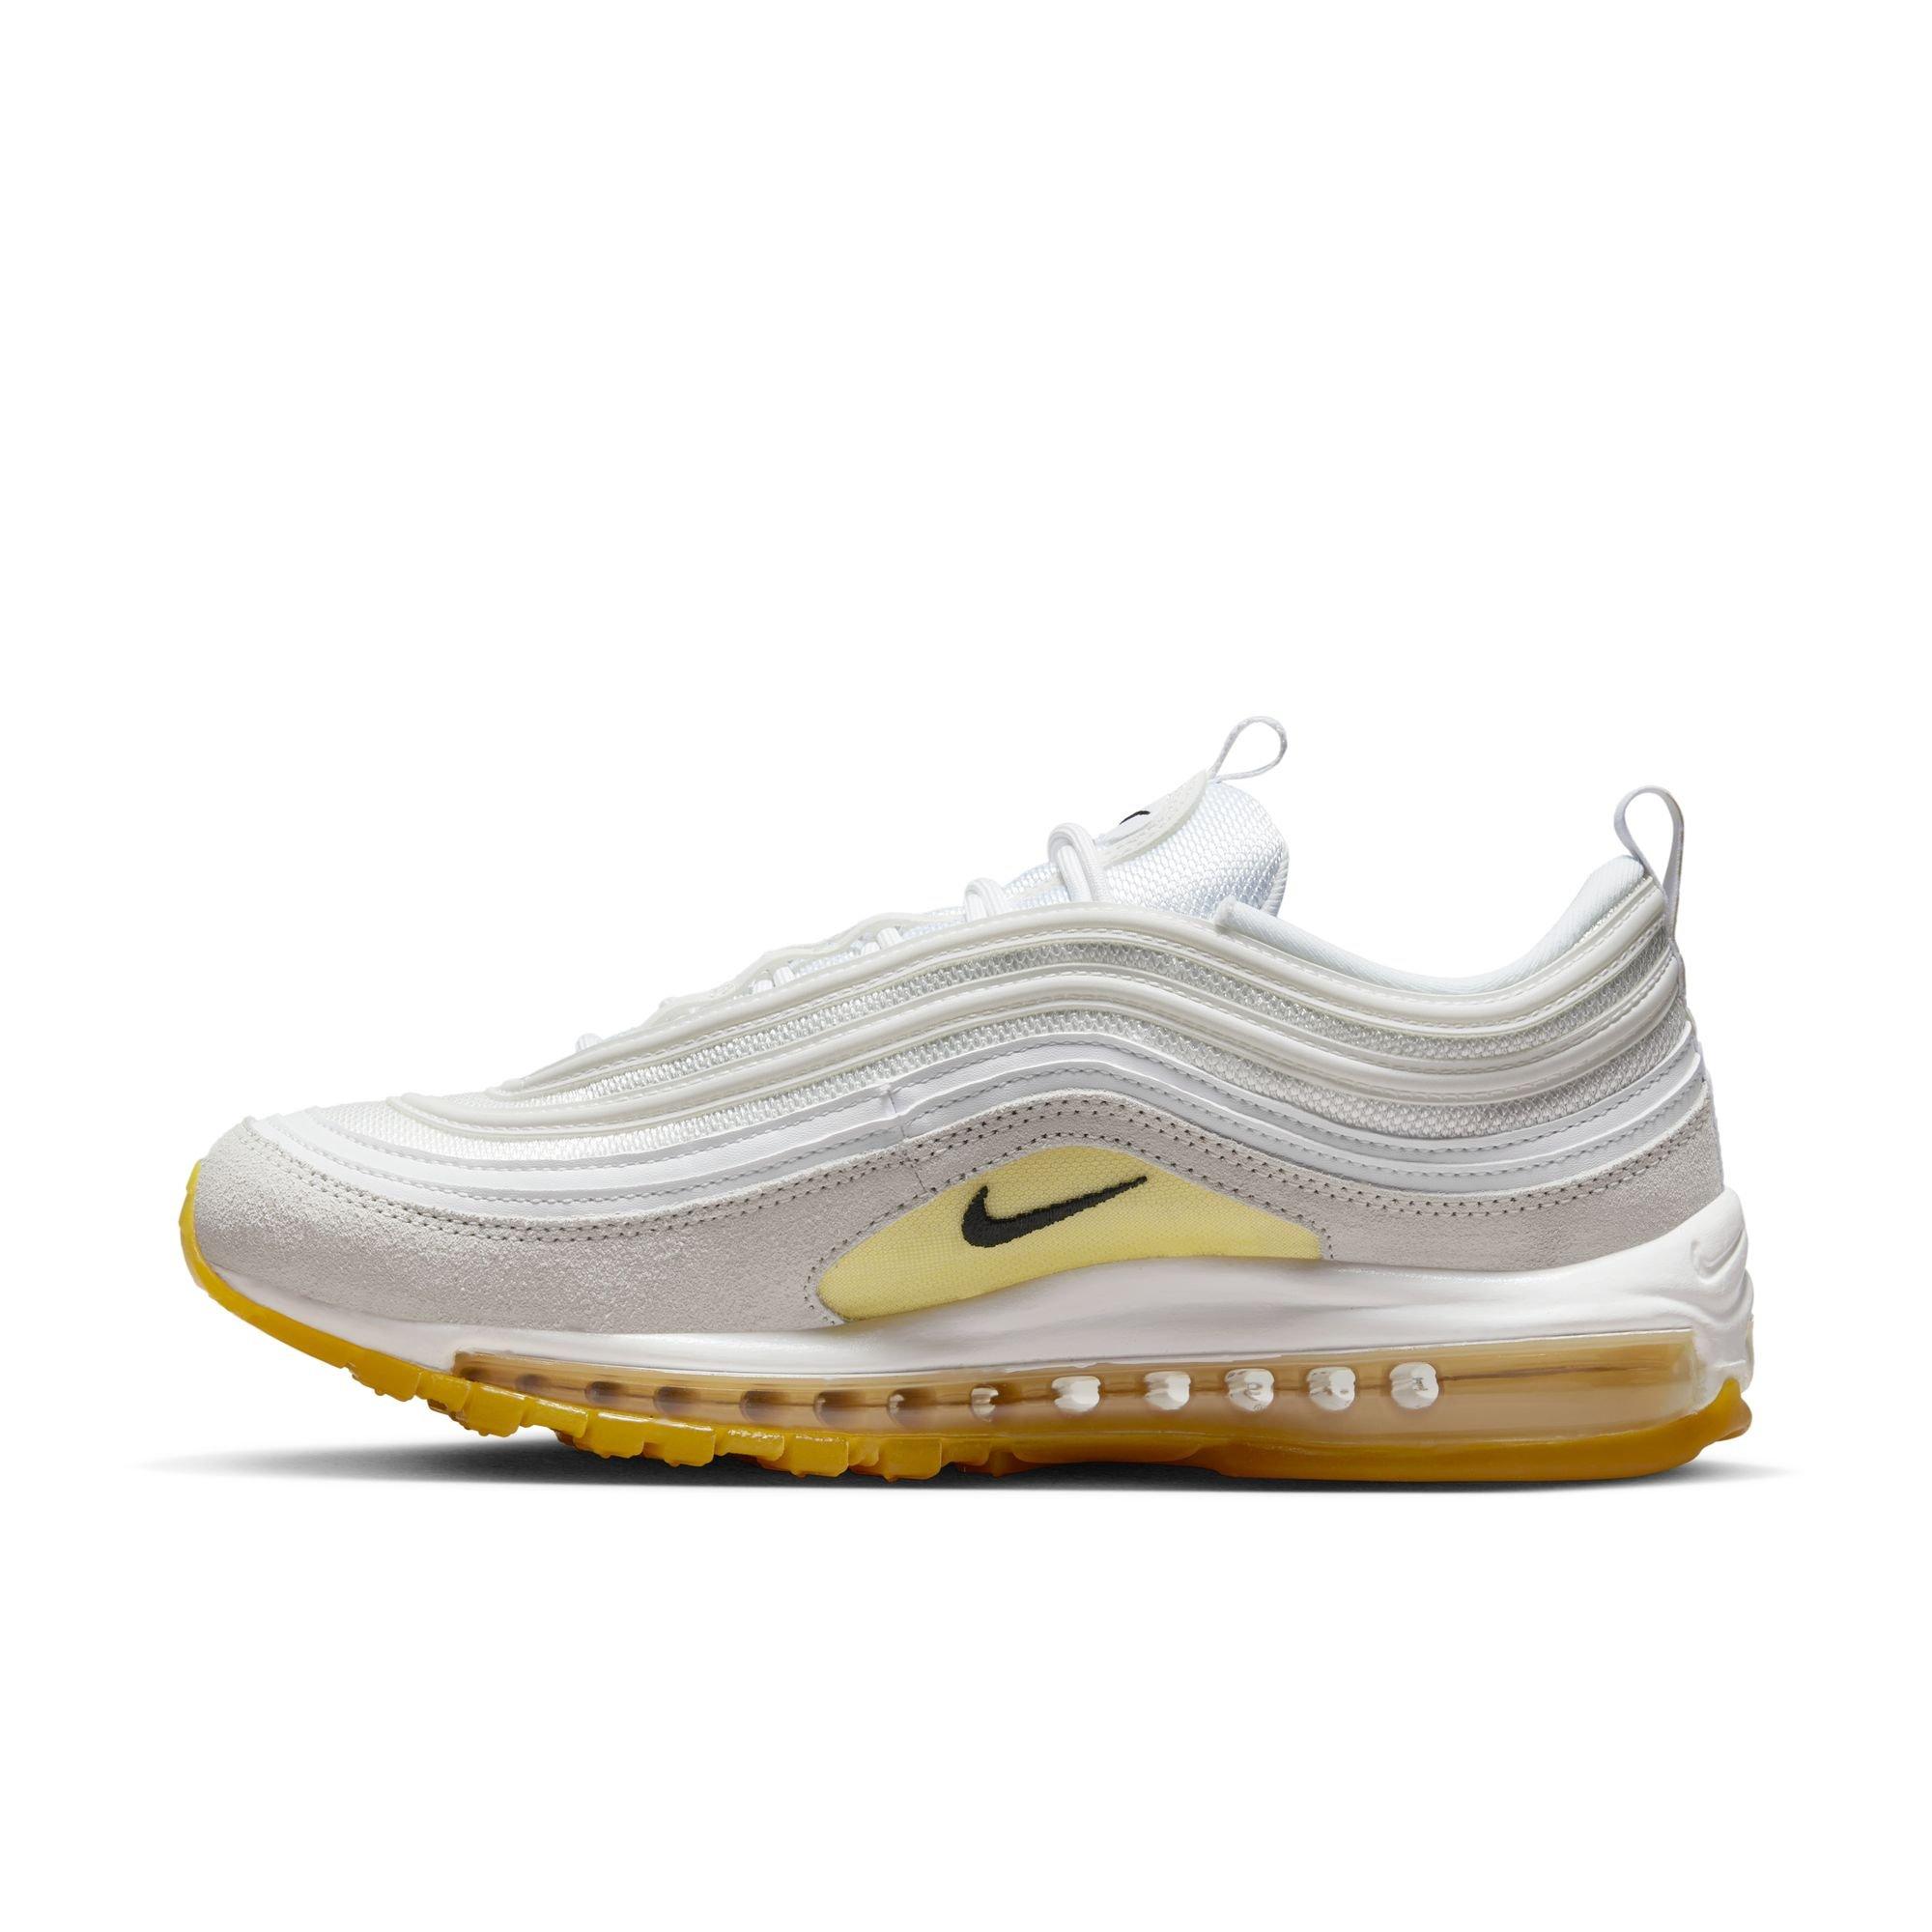 Pockets Re- Nike Trainers 97 Air Max Gold in Natural for Men